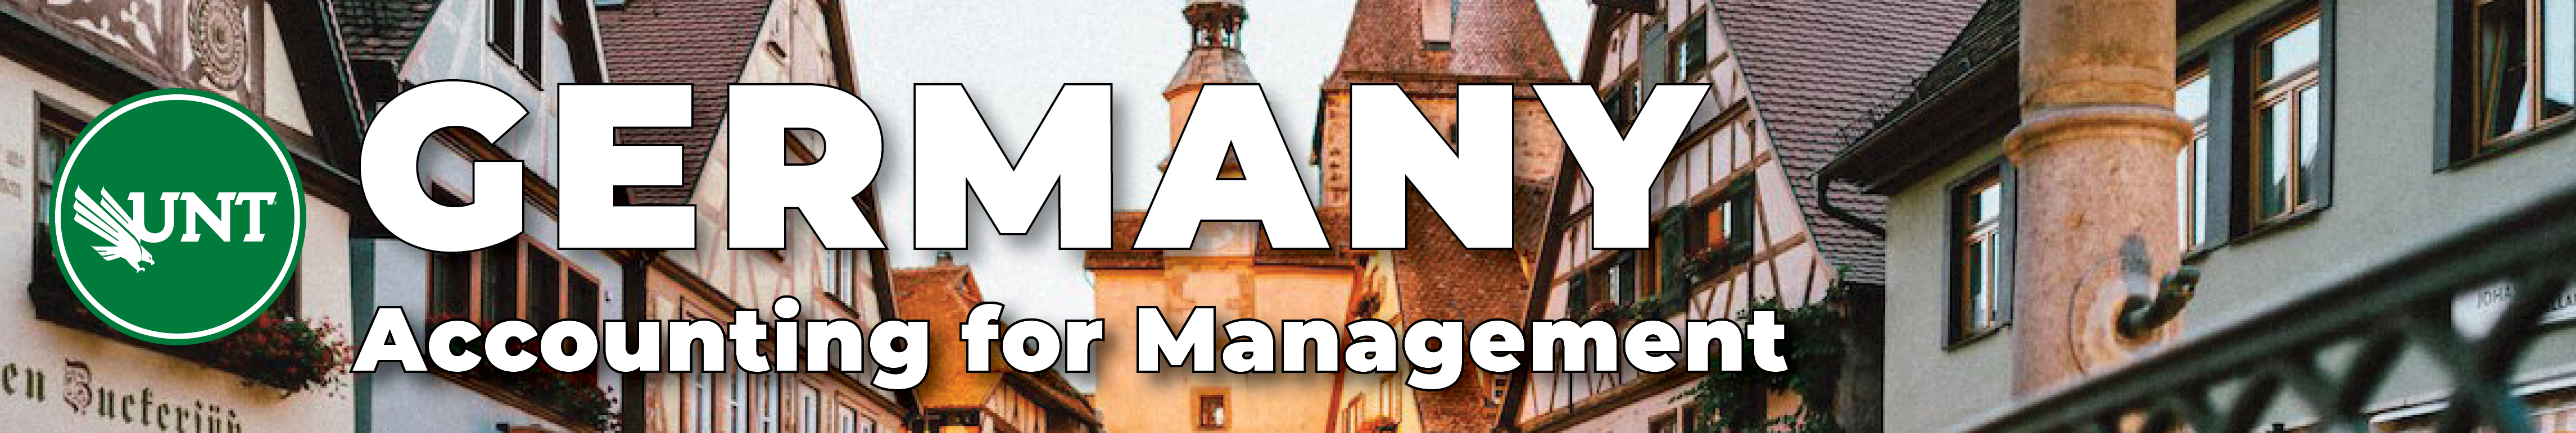 Accounting for Management German